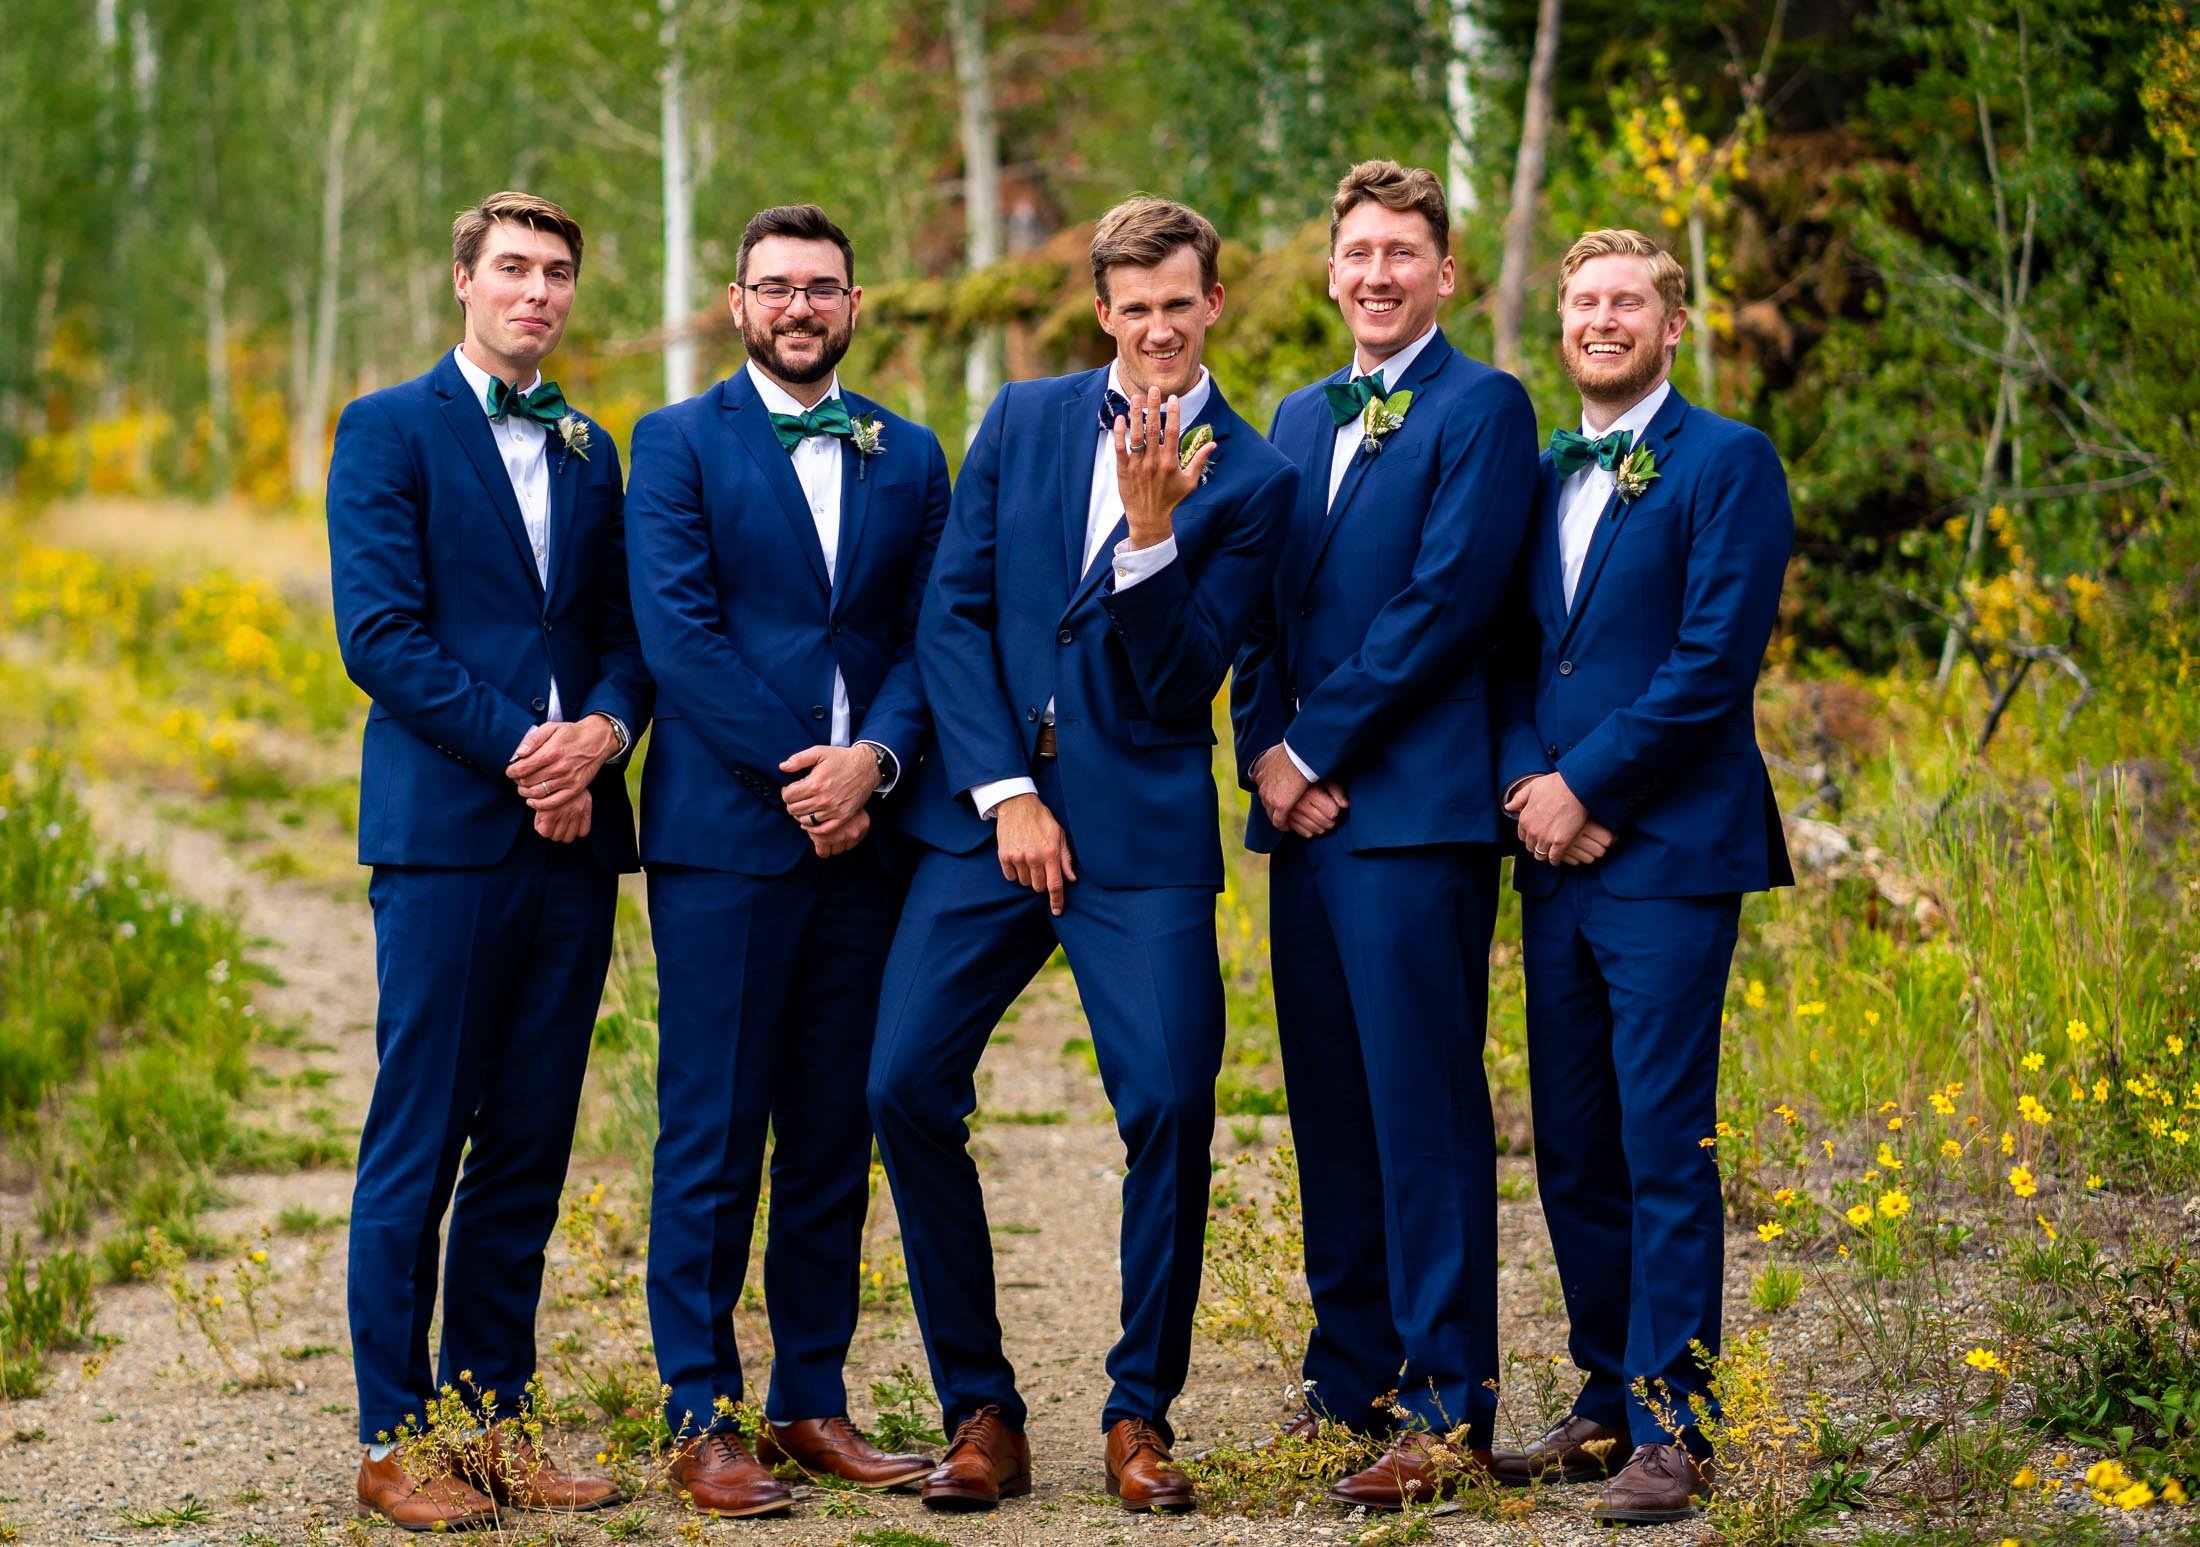 Groom and groomsmen pose for a portrait surrounded by aspens in a meadow, wedding, wedding photos, wedding photography, wedding photographer, wedding inspiration, wedding photo inspiration, wedding portraits, wedding ceremony, wedding reception, mountain wedding, Catholic Church wedding, Catholic Church wedding photos, Catholic Church wedding photography, Catholic Church wedding photographer, Catholic Church wedding inspiration, Catholic Church wedding venue, Steamboat Springs wedding, Steamboat Springs wedding photos, Steamboat Springs wedding photography, Steamboat Springs wedding photographer, Colorado wedding, Colorado wedding photos, Colorado wedding photography, Colorado wedding photographer, Colorado mountain wedding, Colorado wedding inspiration